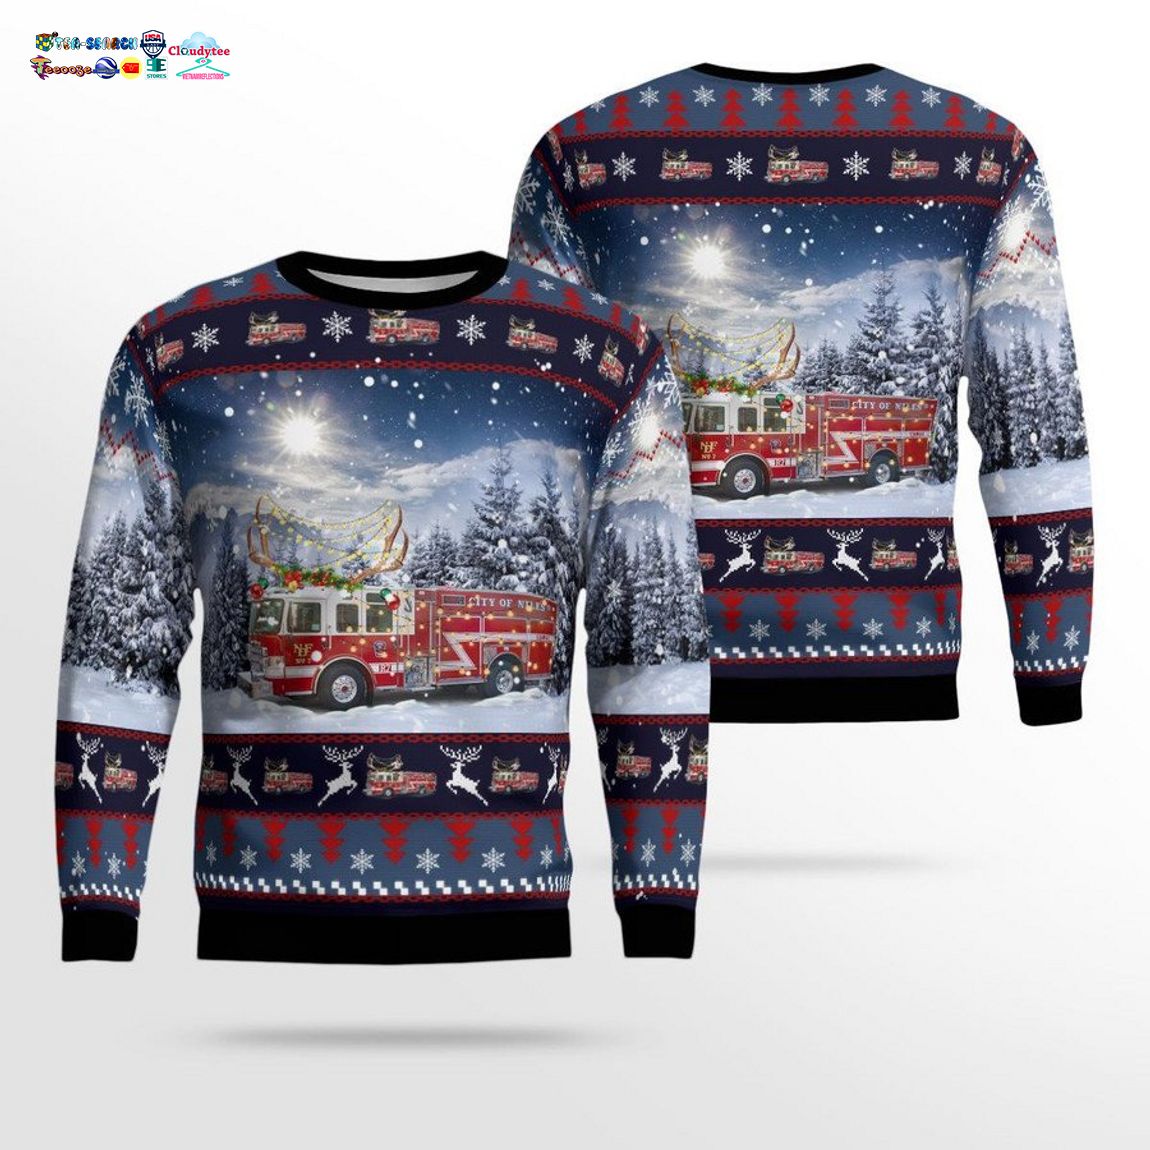 ohio-niles-fire-department-3d-christmas-sweater-1-1S7hq.jpg